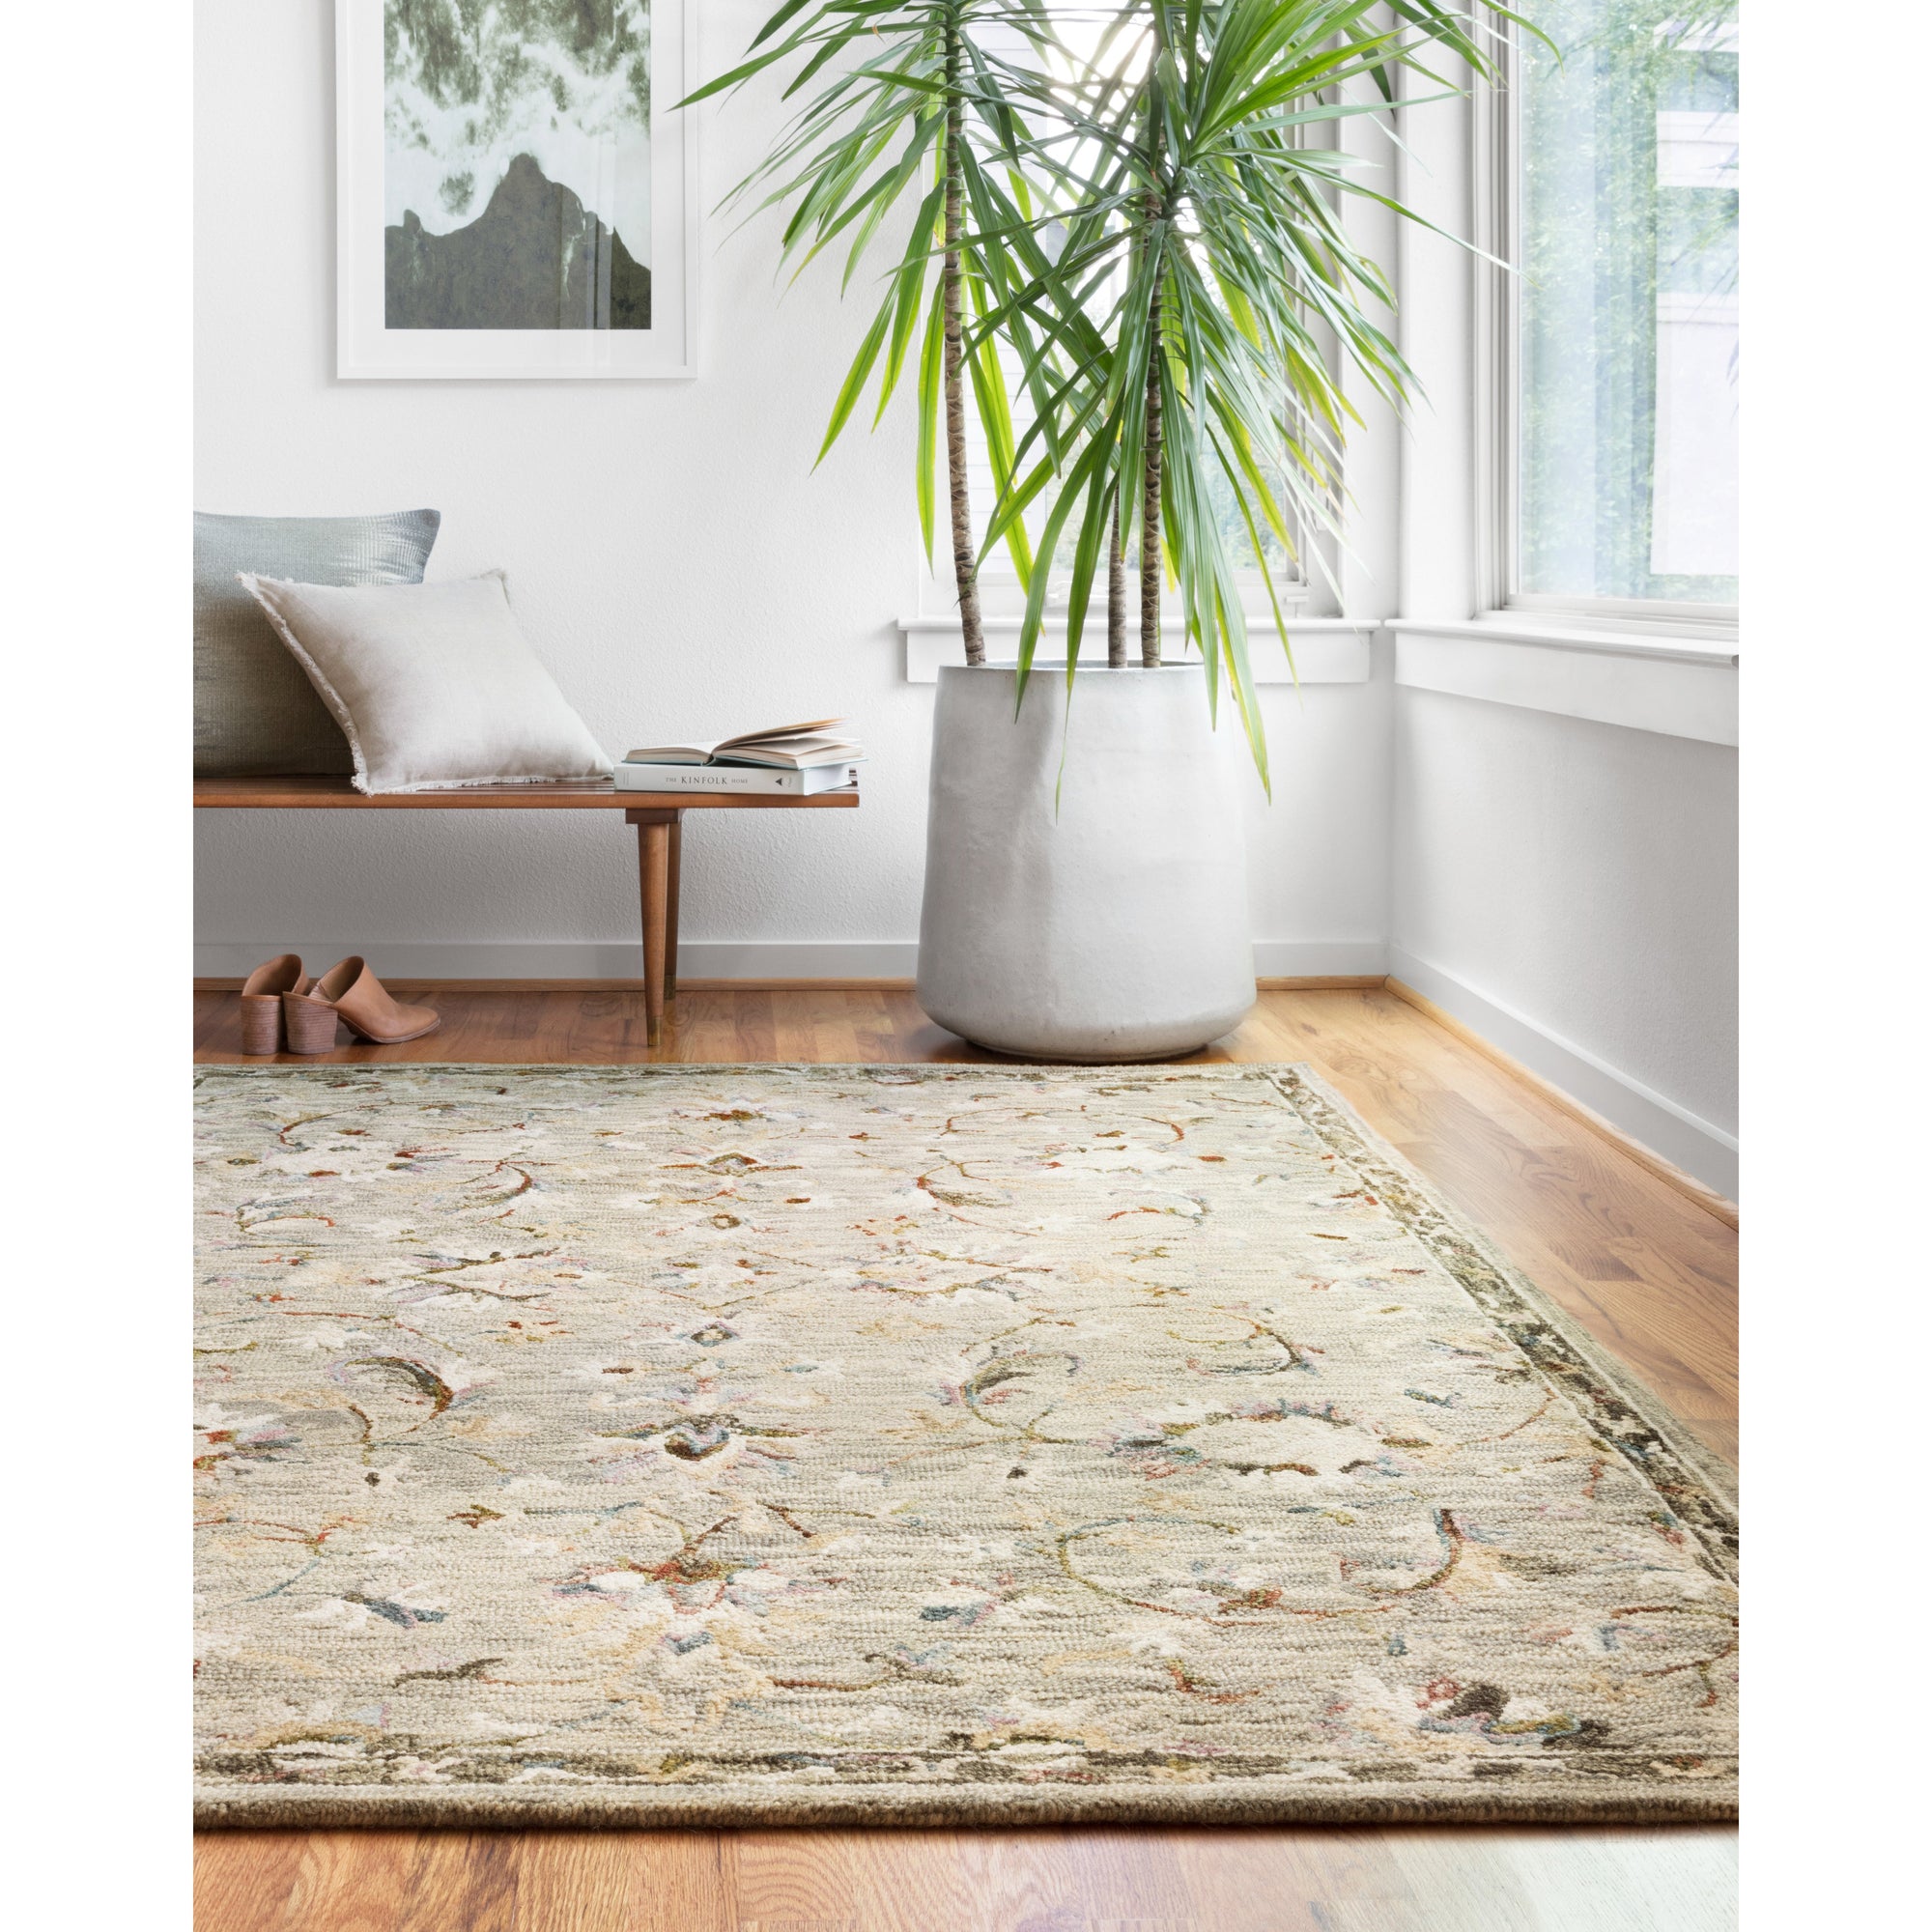 Rugs by Roo Loloi Beatty Grey Multi Area Rug in size 18" x 18" Sample